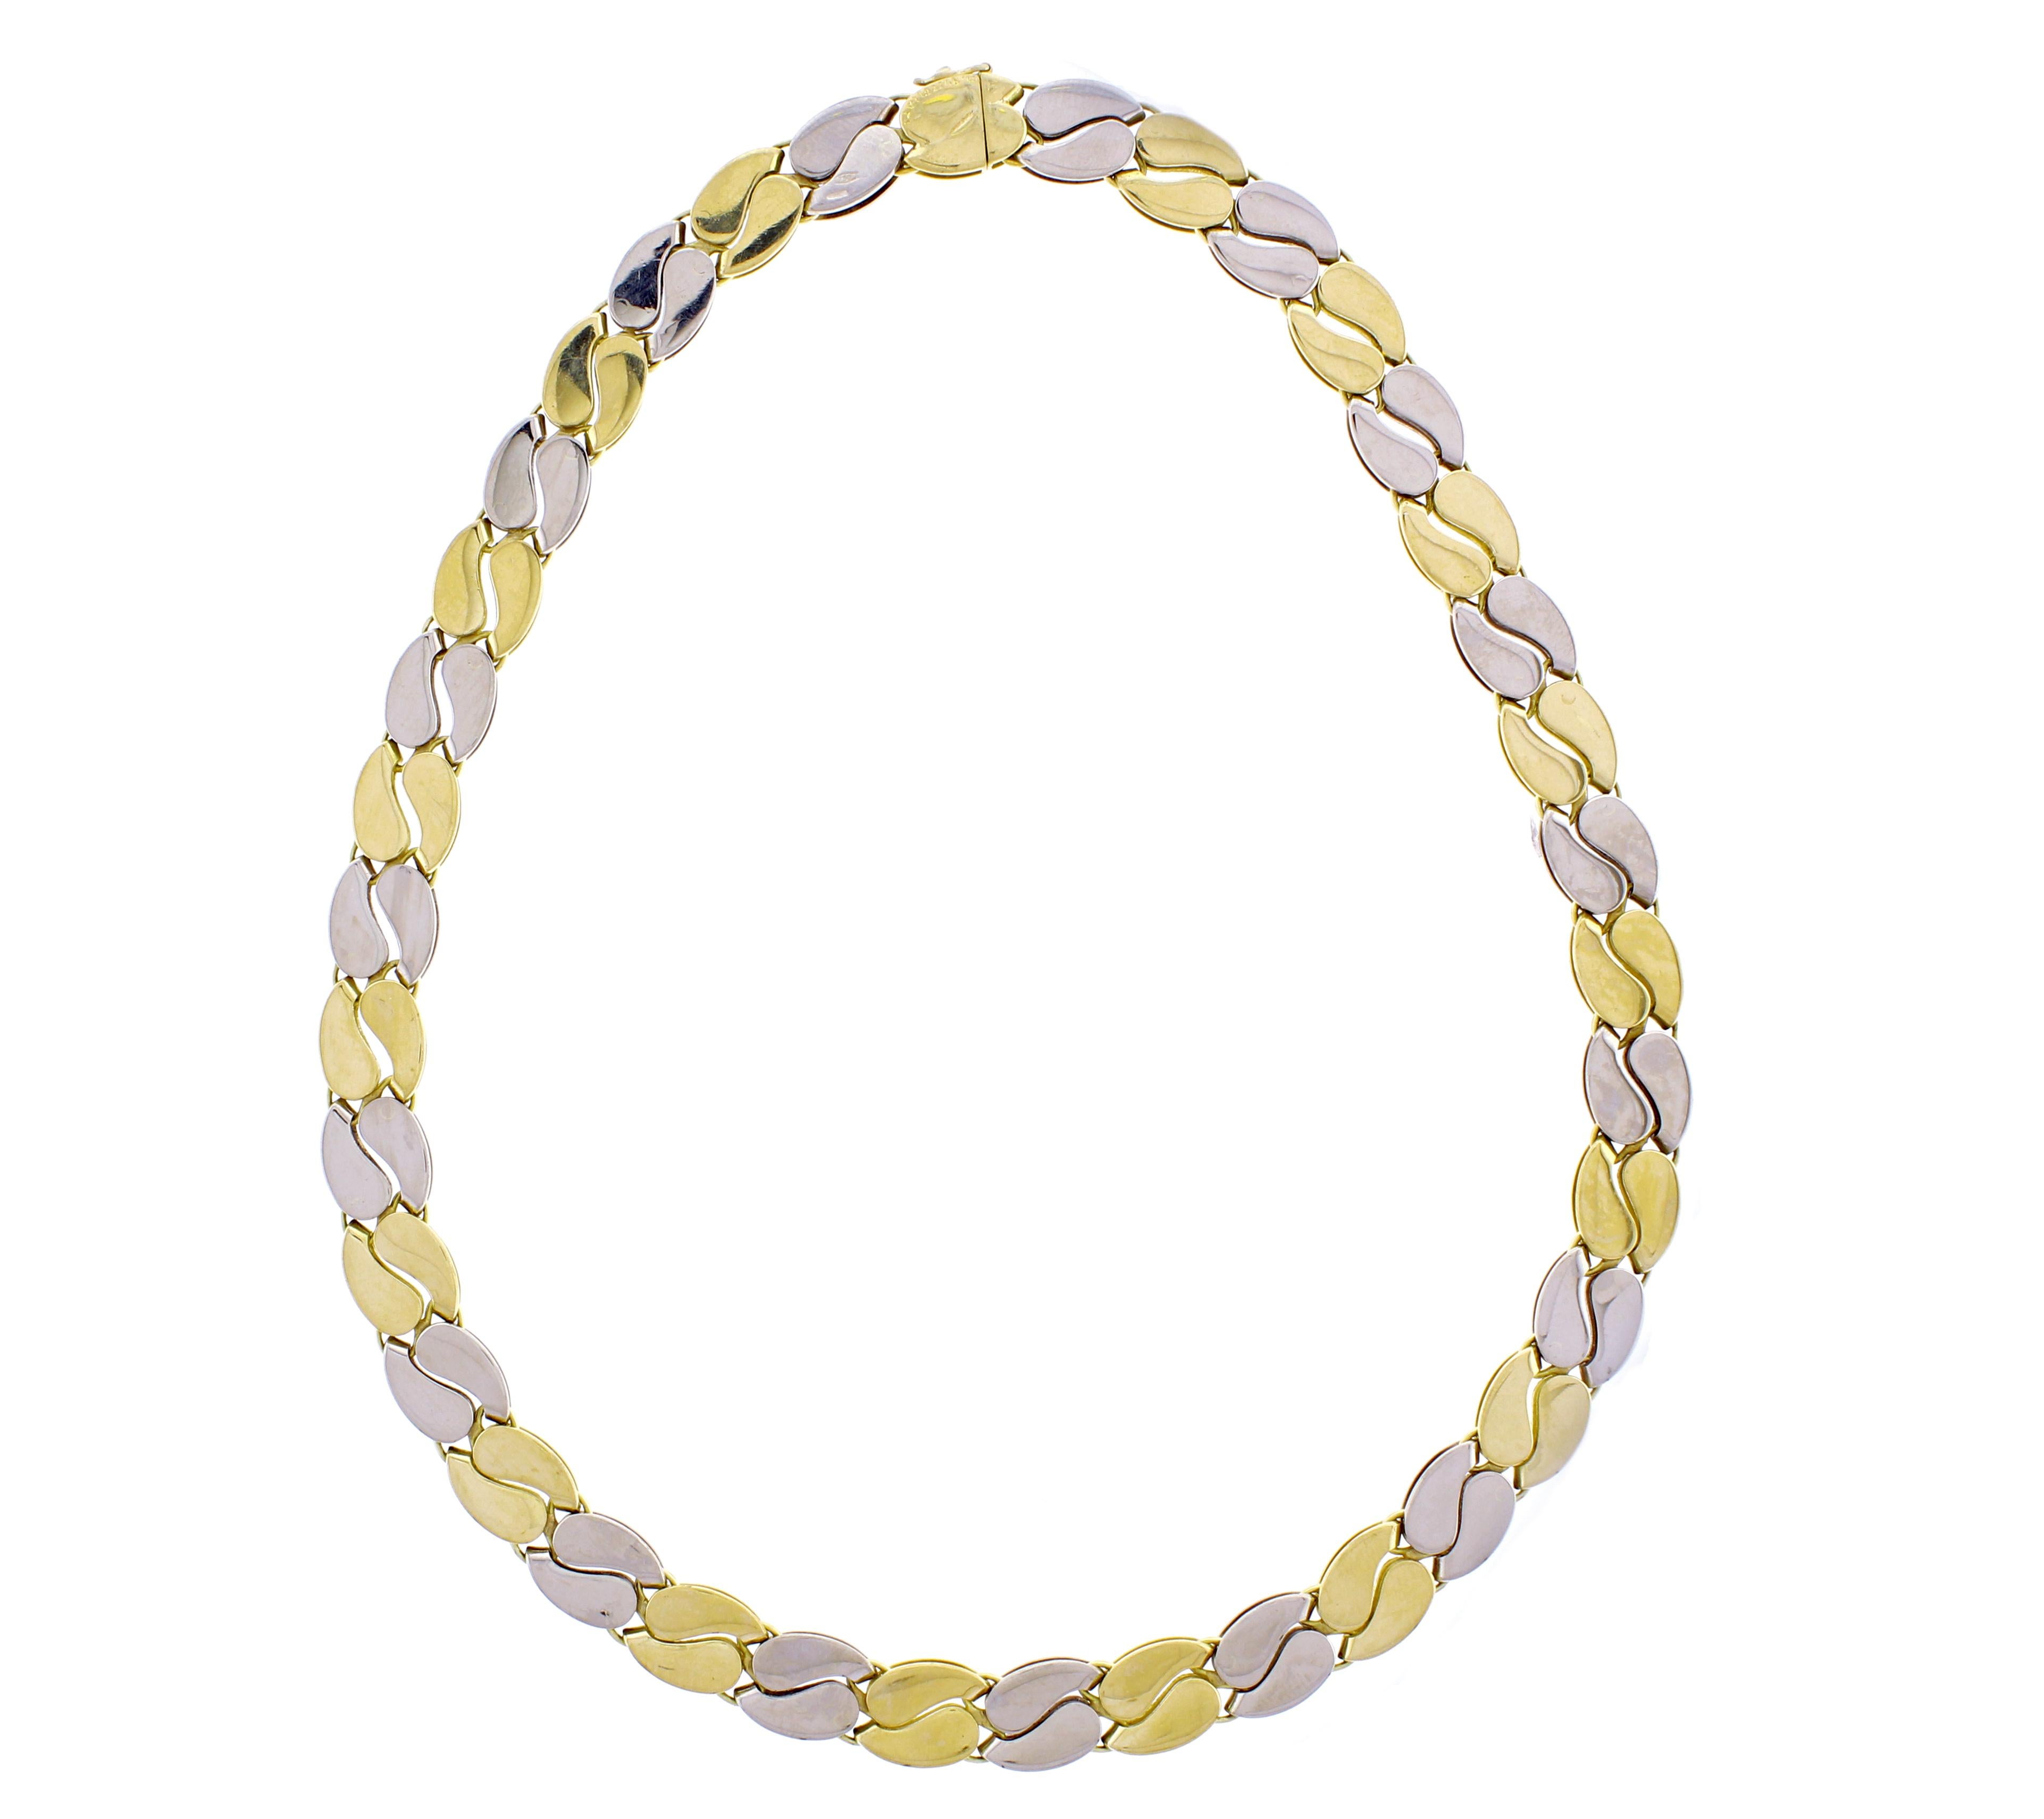 From master jeweler Mario Buccellati, a reversible white and yellow 18 karat gold necklace. One side features Mario Buccellati's iconic textured engraving the other side is high polished. 10mm wide, 16 ¼ inches long,  95 grams. Hand signed M.